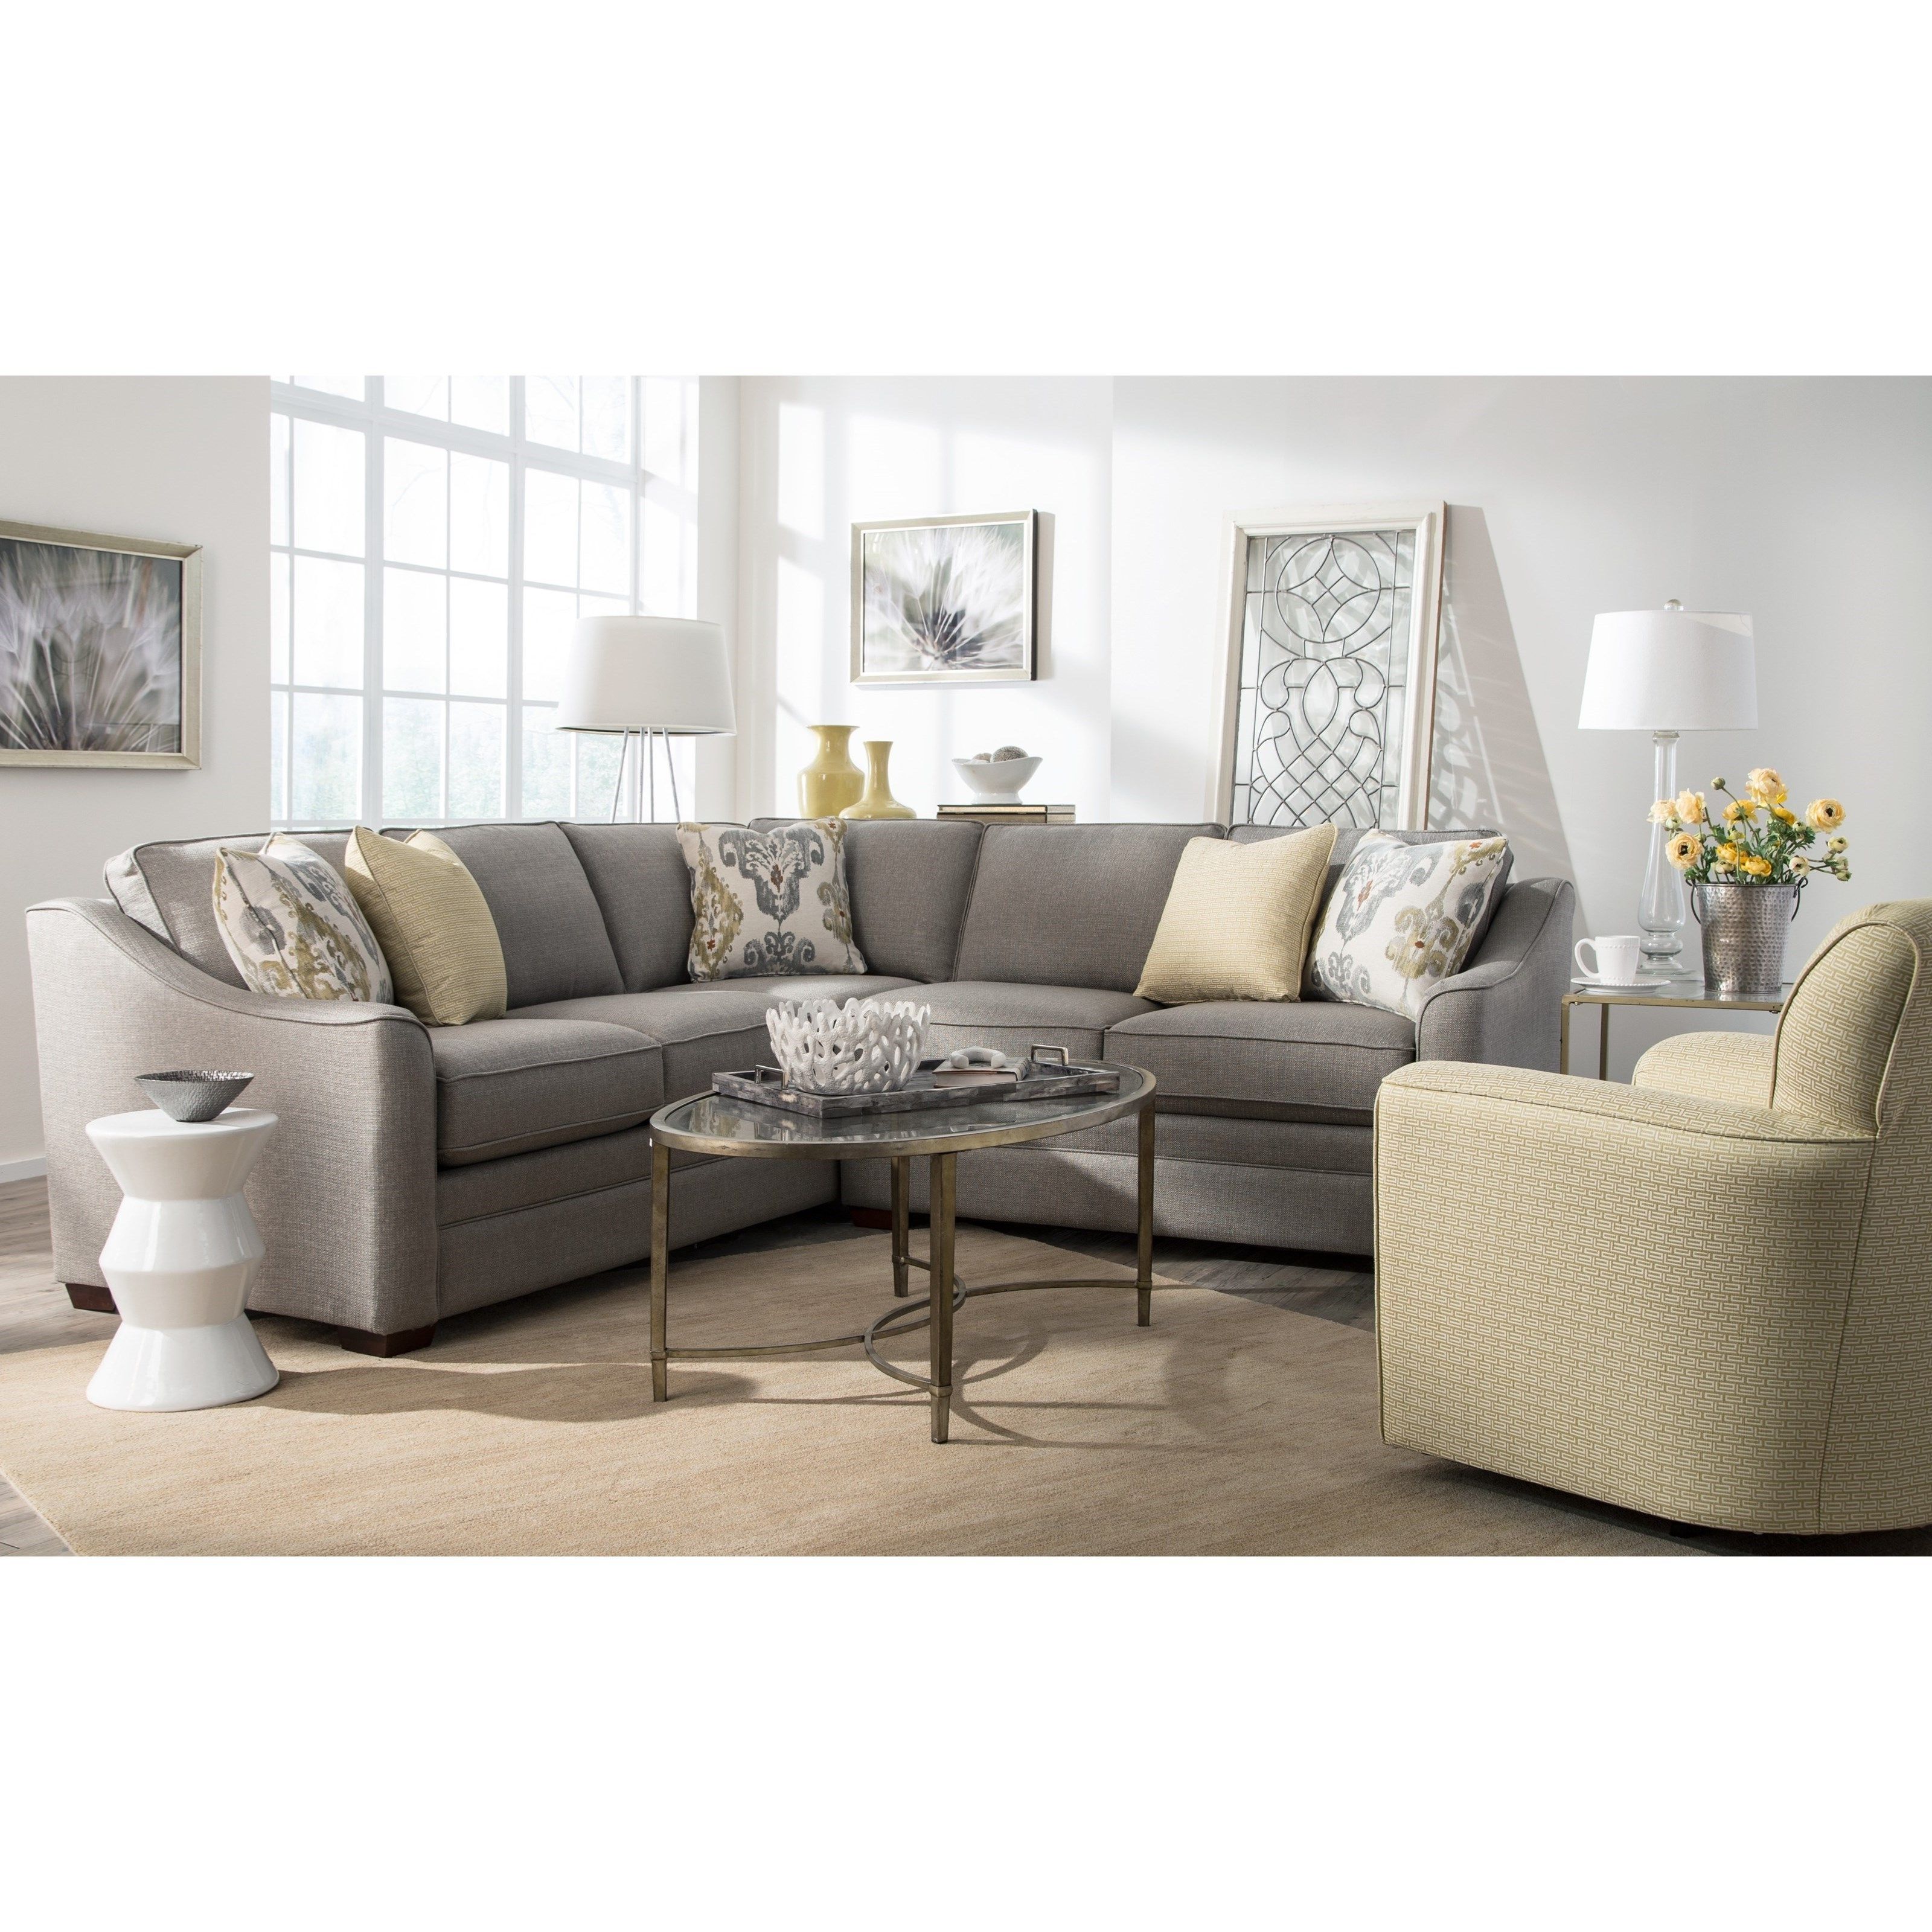 Most Recently Released Two Piece Customizable Corner Sectional Sofa With Left Return Inside Gardiners Sectional Sofas (View 5 of 20)